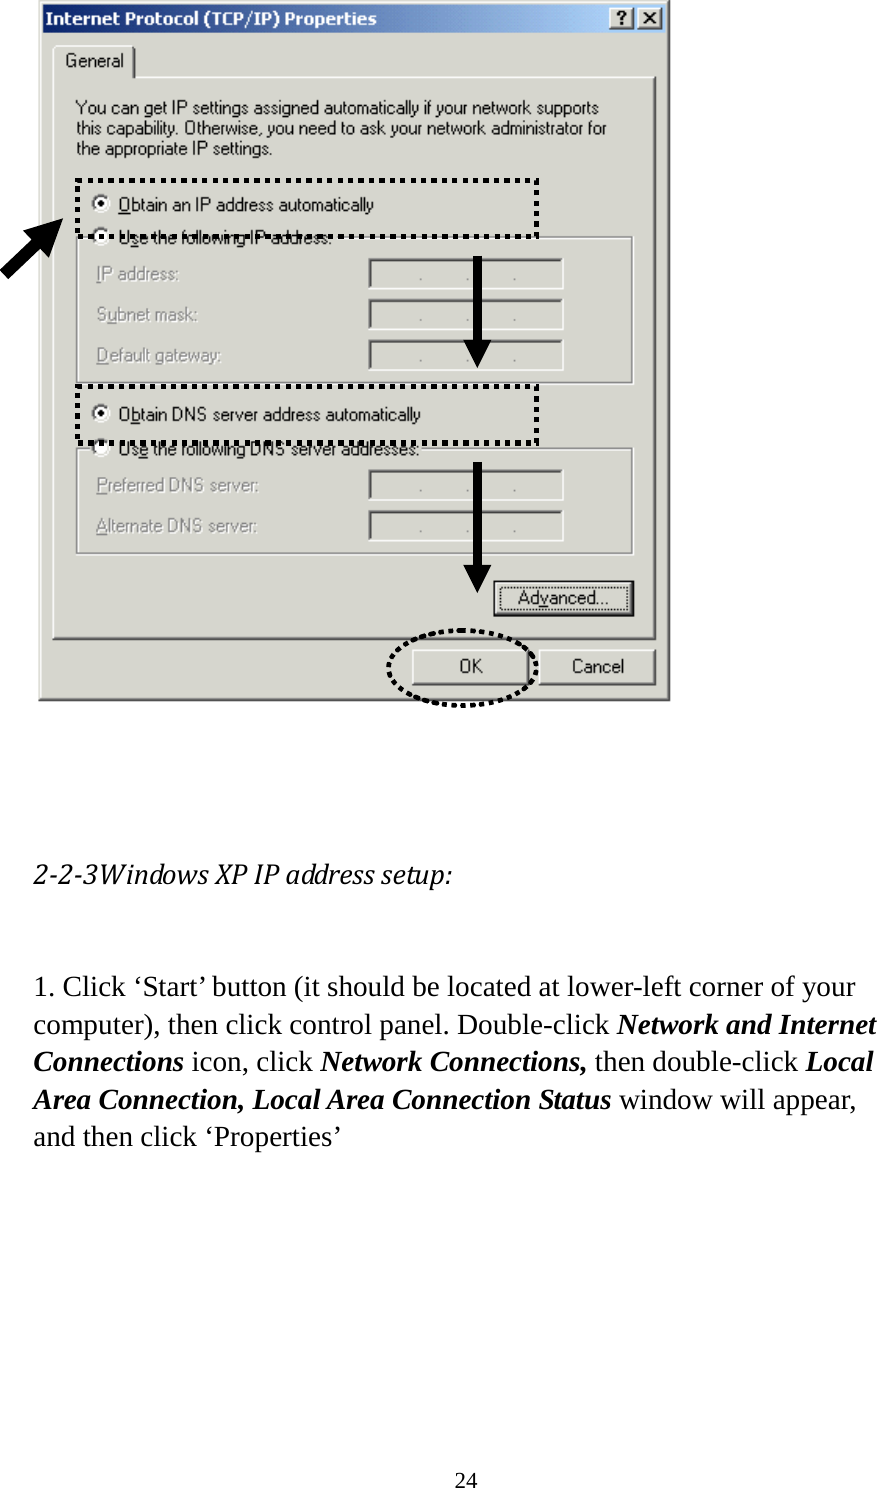 24     2-2-3Windows XP IP address setup:  1. Click ‘Start’ button (it should be located at lower-left corner of your computer), then click control panel. Double-click Network and Internet Connections icon, click Network Connections, then double-click Local Area Connection, Local Area Connection Status window will appear, and then click ‘Properties’  